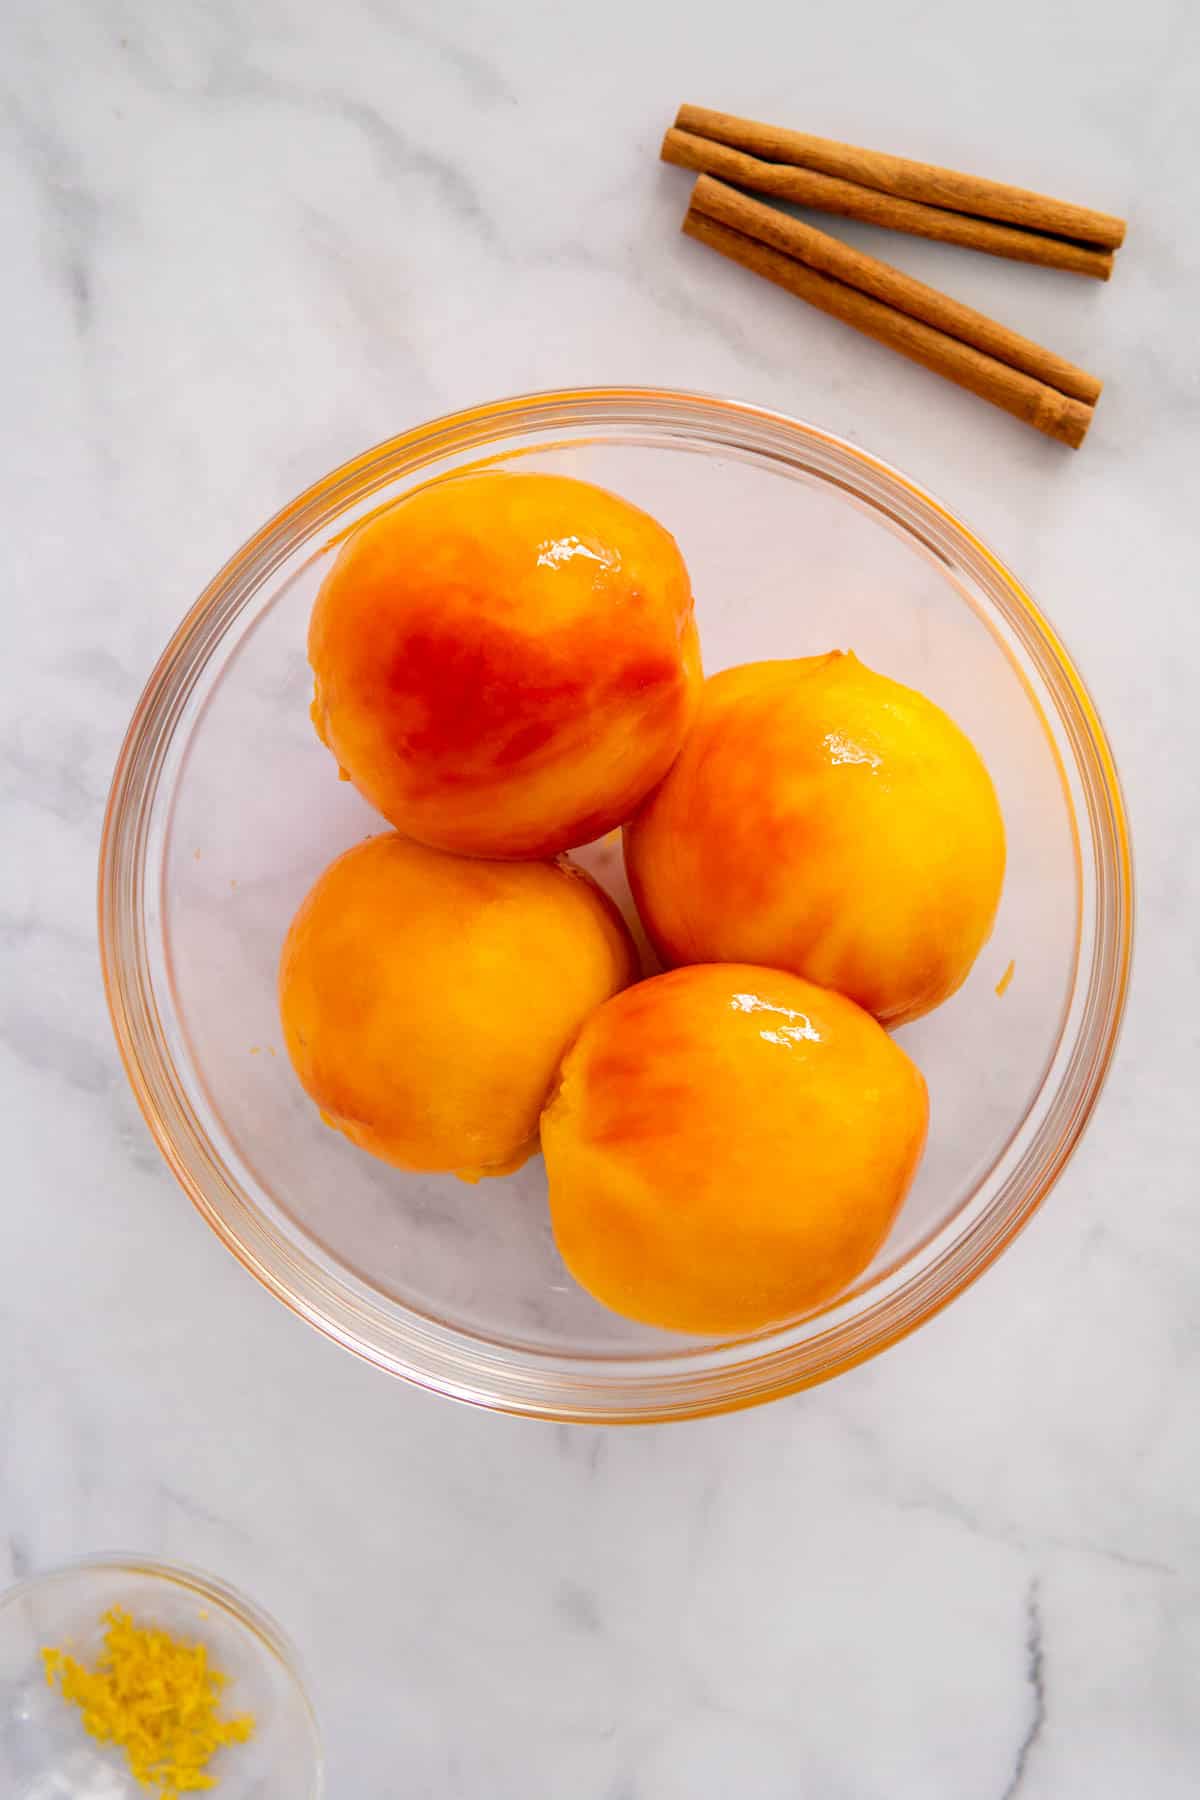 Blanched peaches with the skins removed.